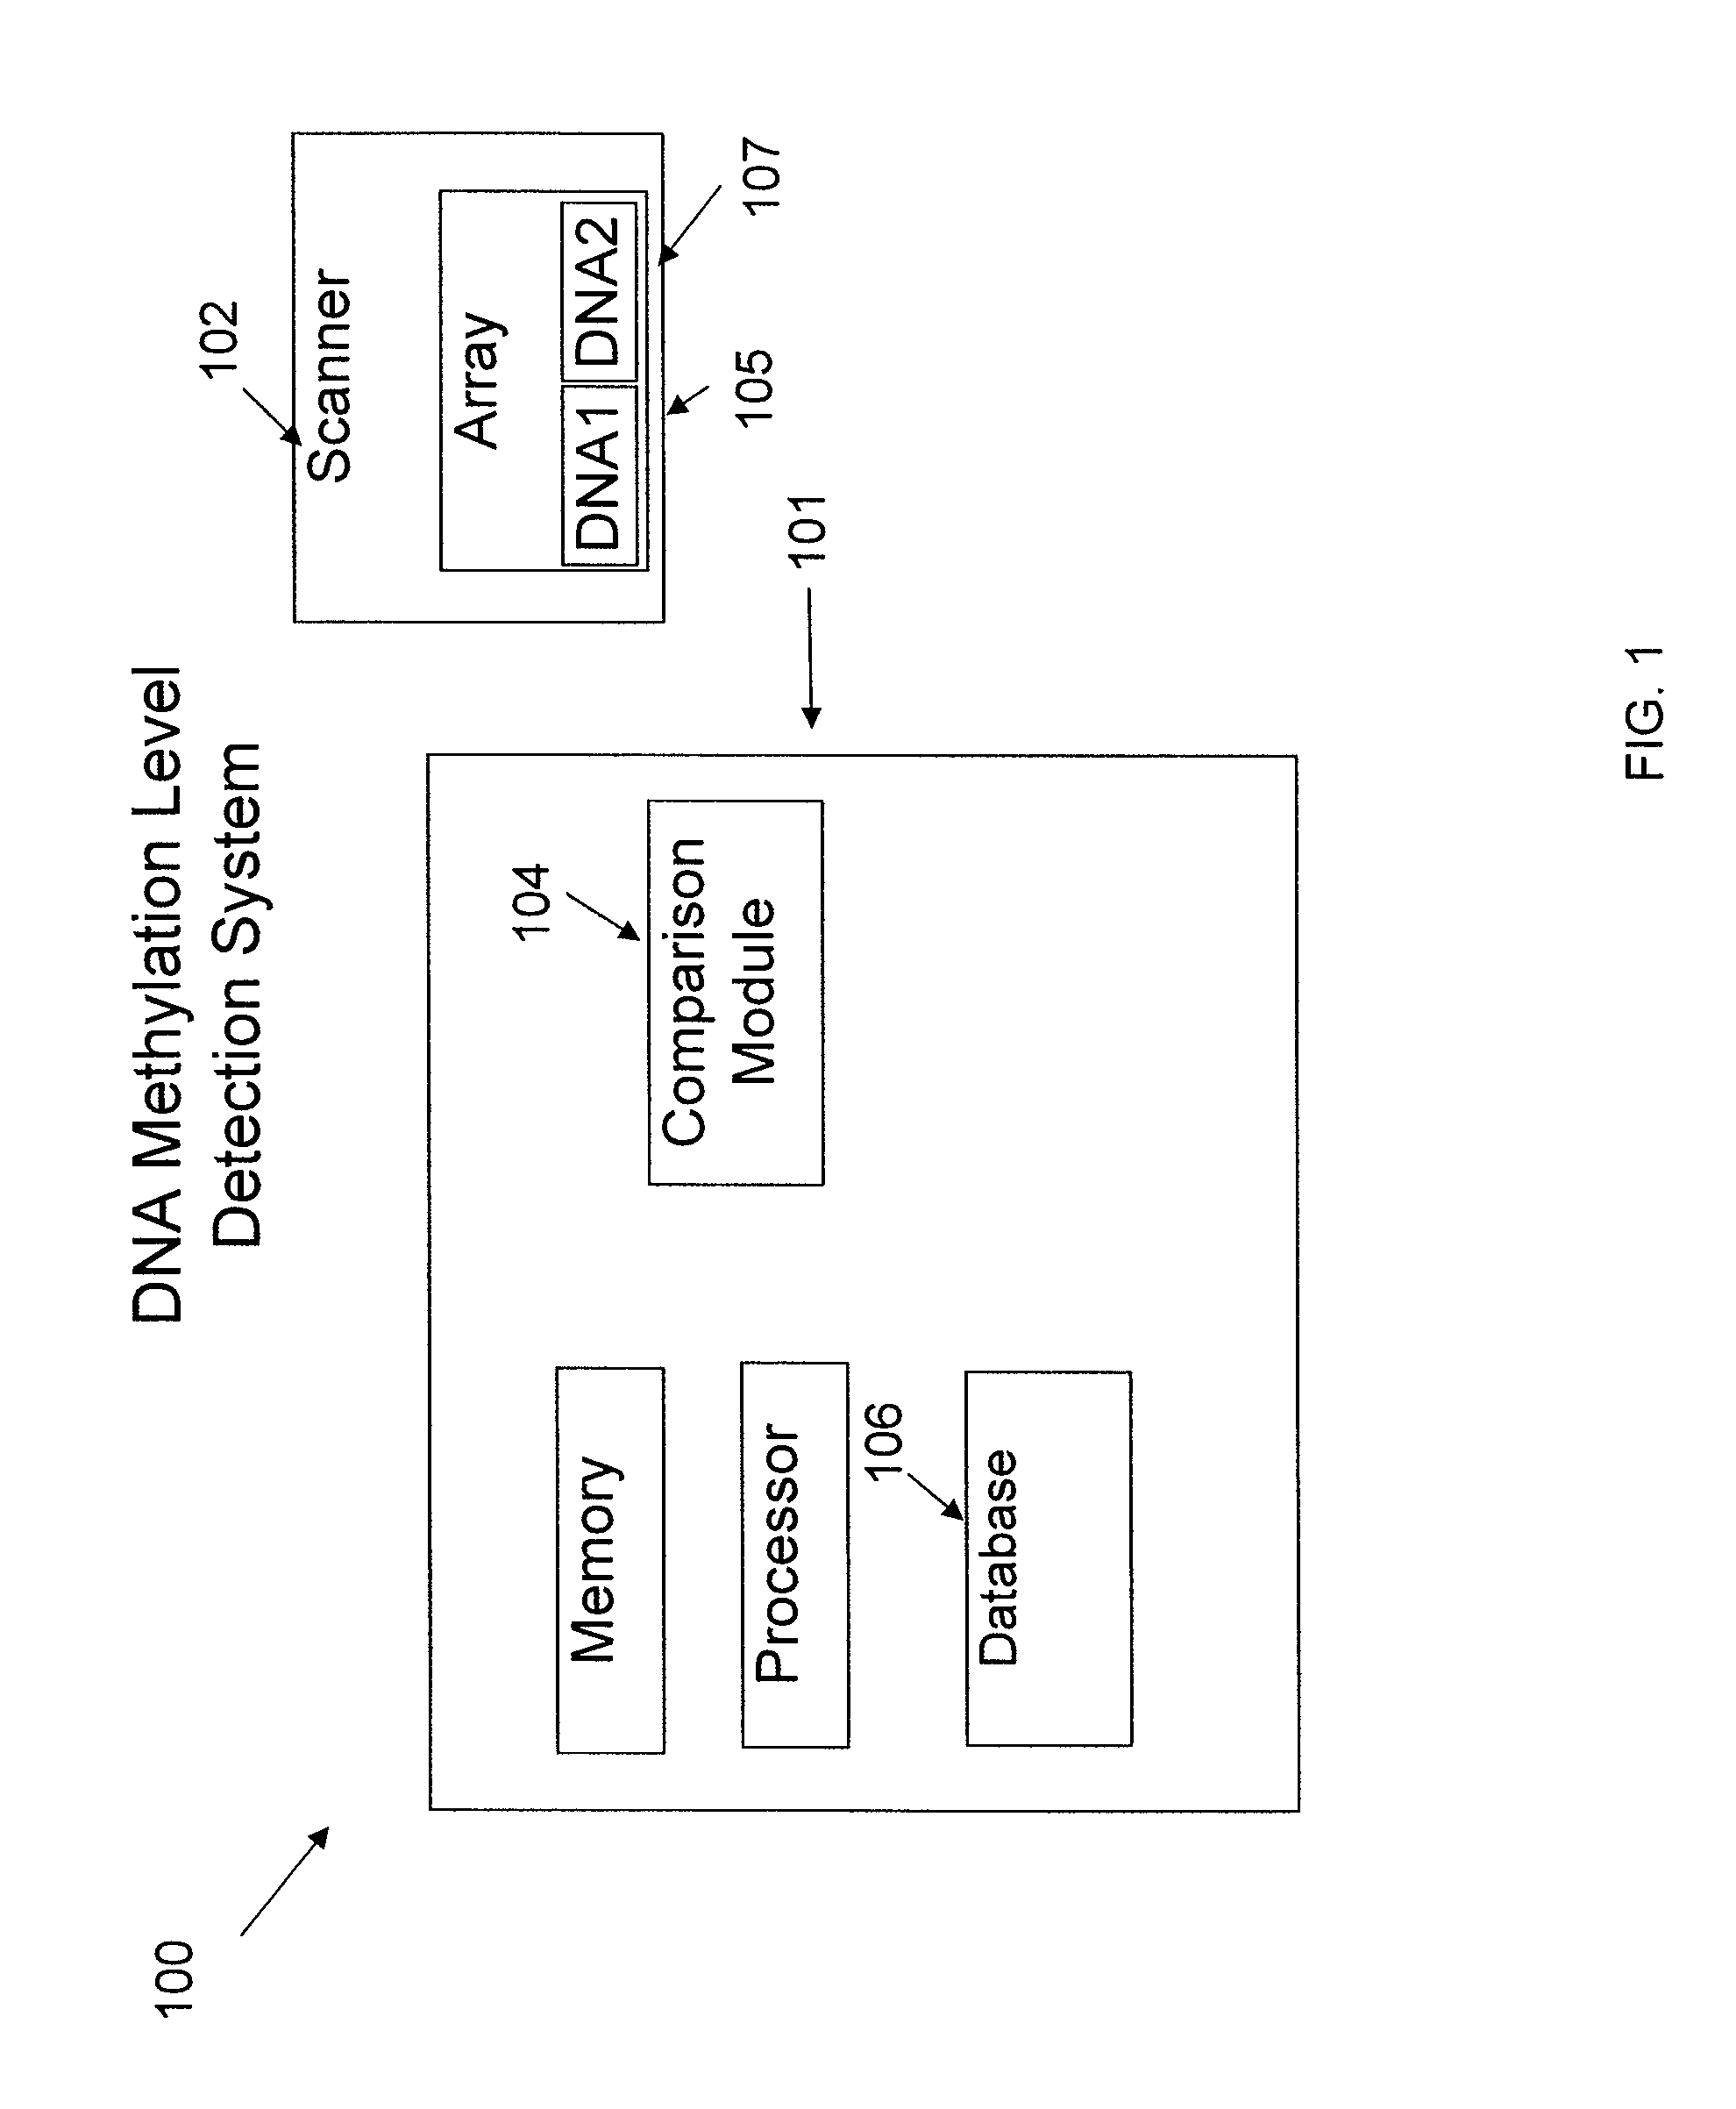 System and method of measuring methylation of nucleic acids